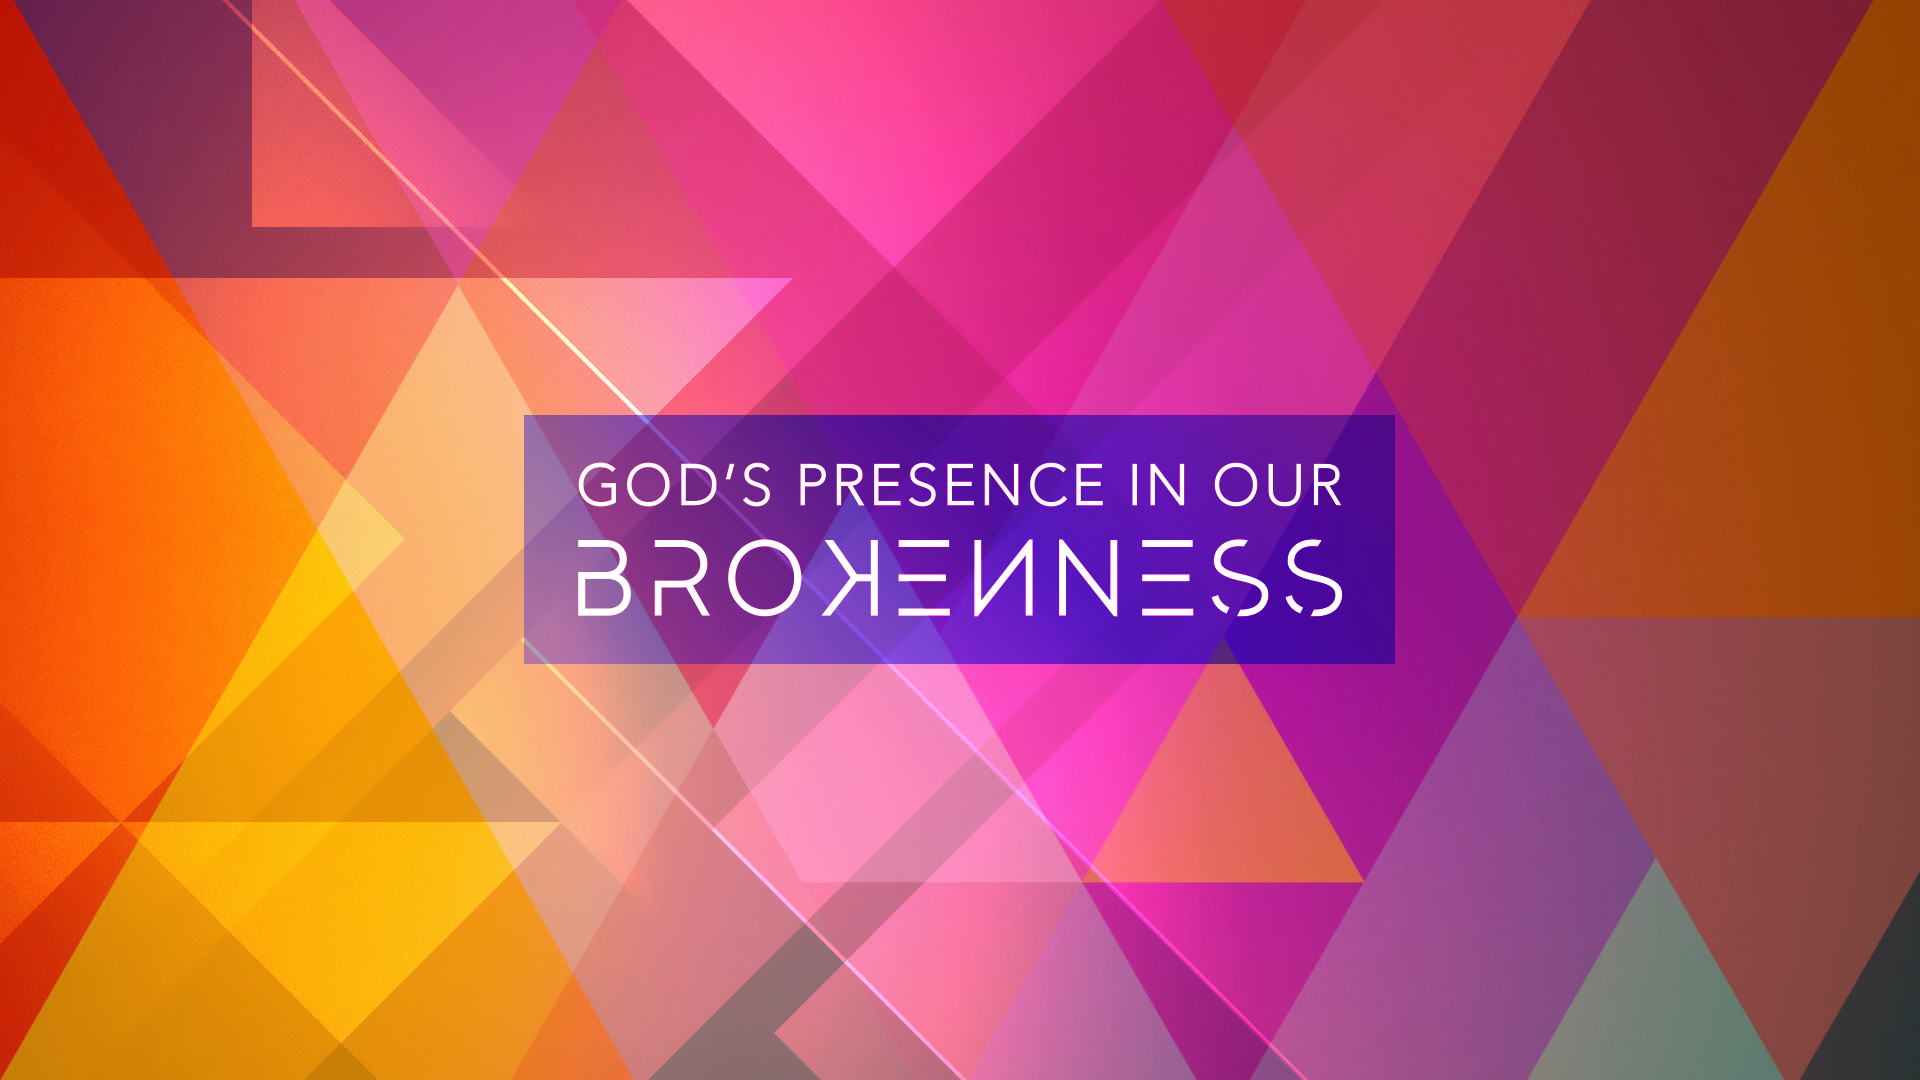 Character: God's Presence in Our Brokenness